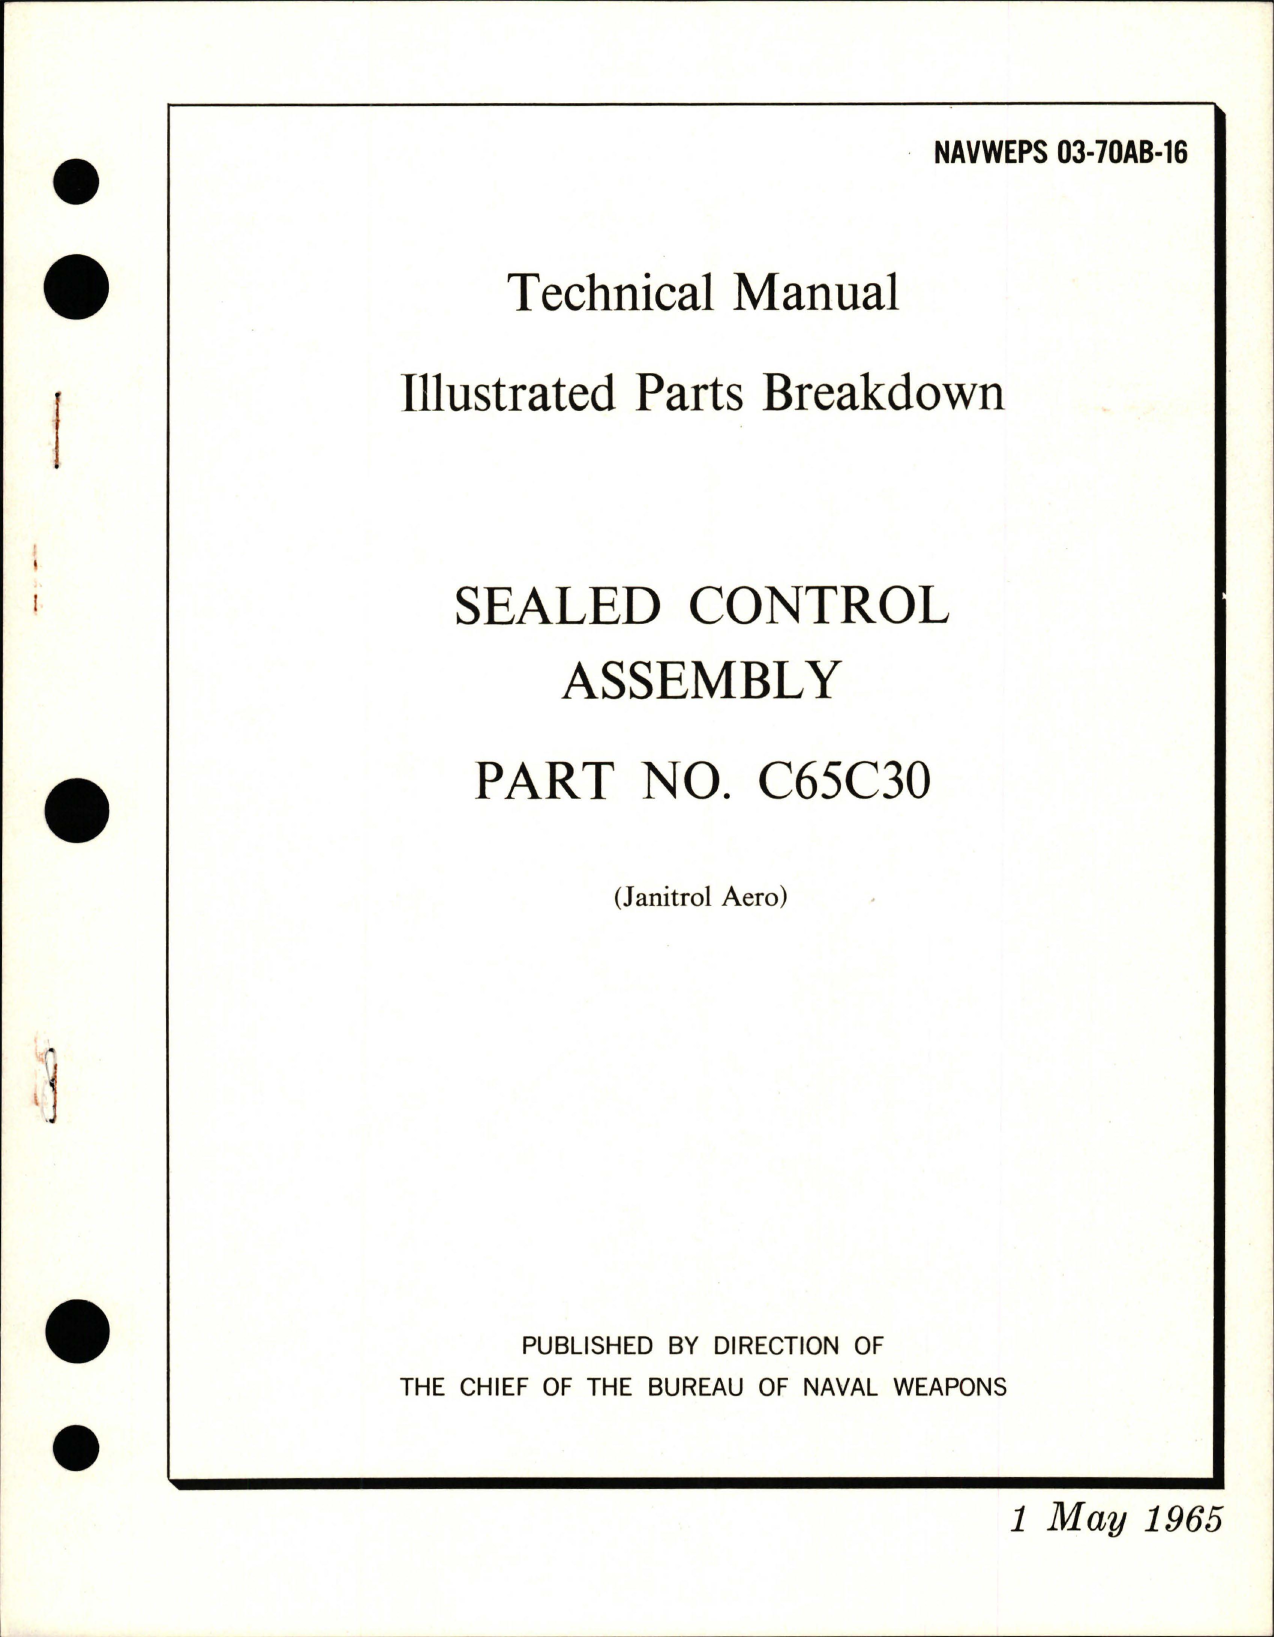 Sample page 1 from AirCorps Library document: Illustrated Parts Breakdown for Sealed Control Assembly - Part C65C30 